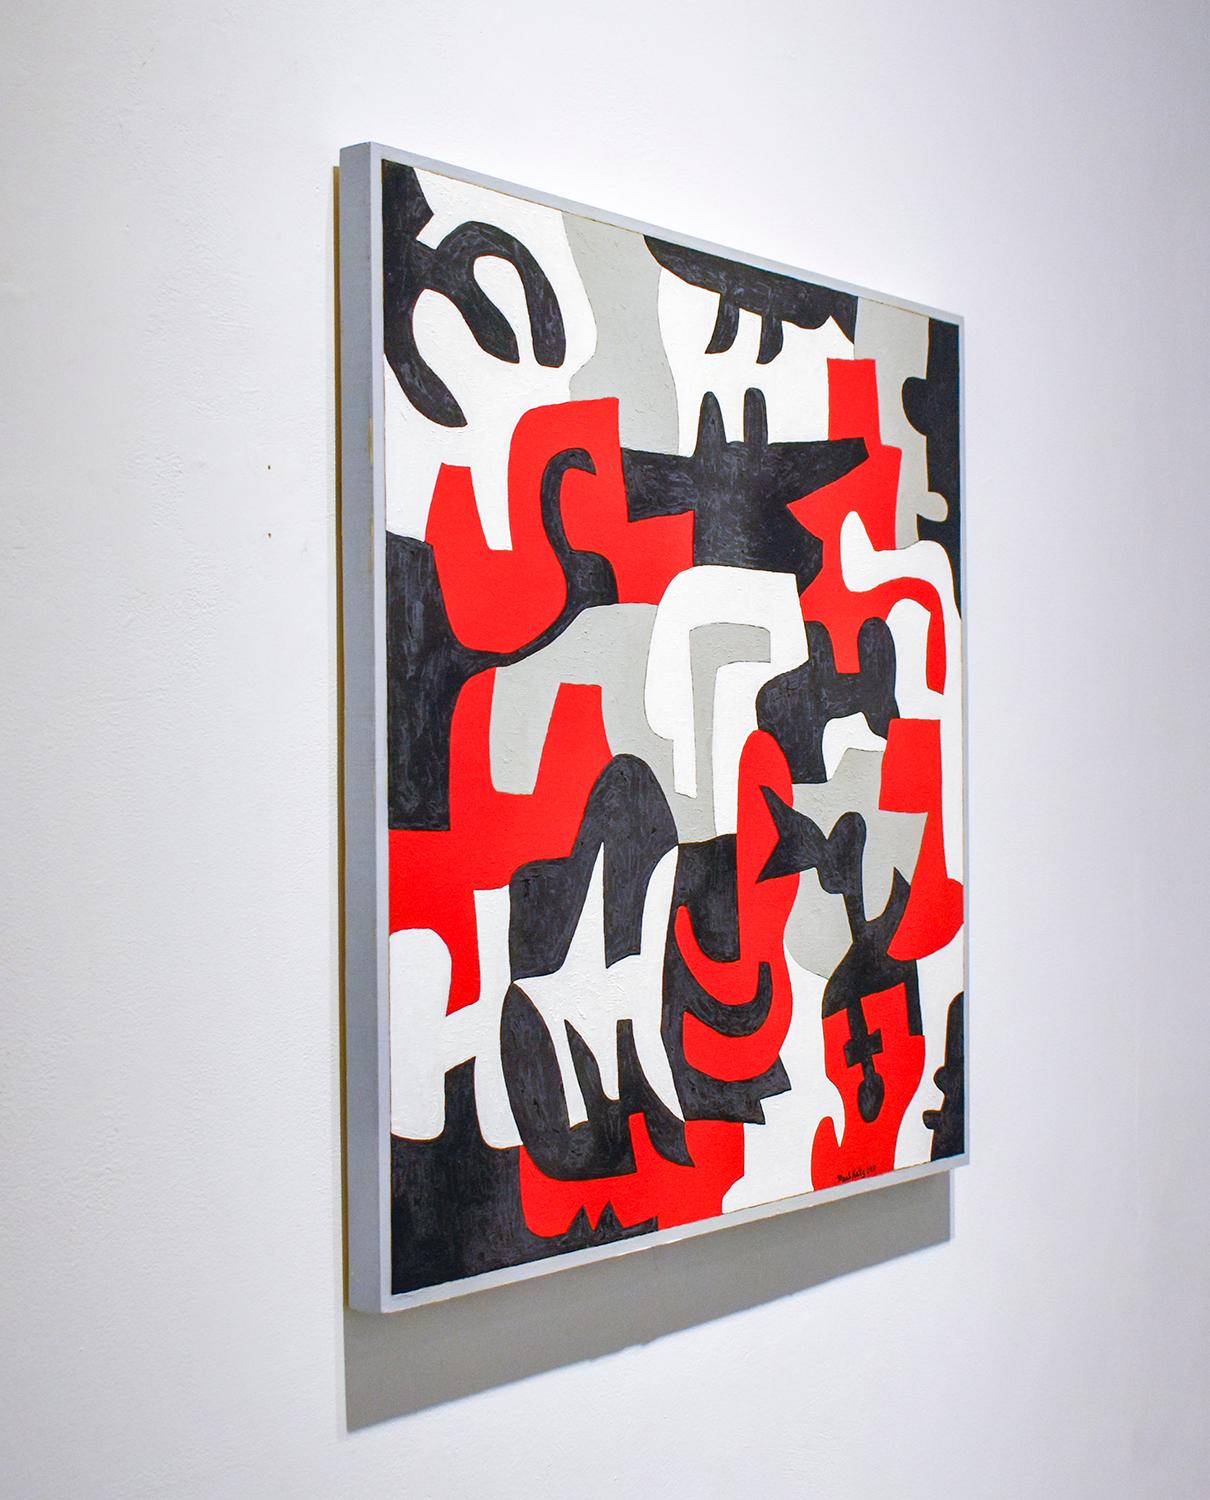 Contemporary, hard edge abstract painting in red, grey, white and black
Interlock #53, 2017
24 x 24 inches
oil on wood panel
Sides are painted so it's ready to hang as is

This contemporary, abstract oil painting in graphic black, white, grey & red